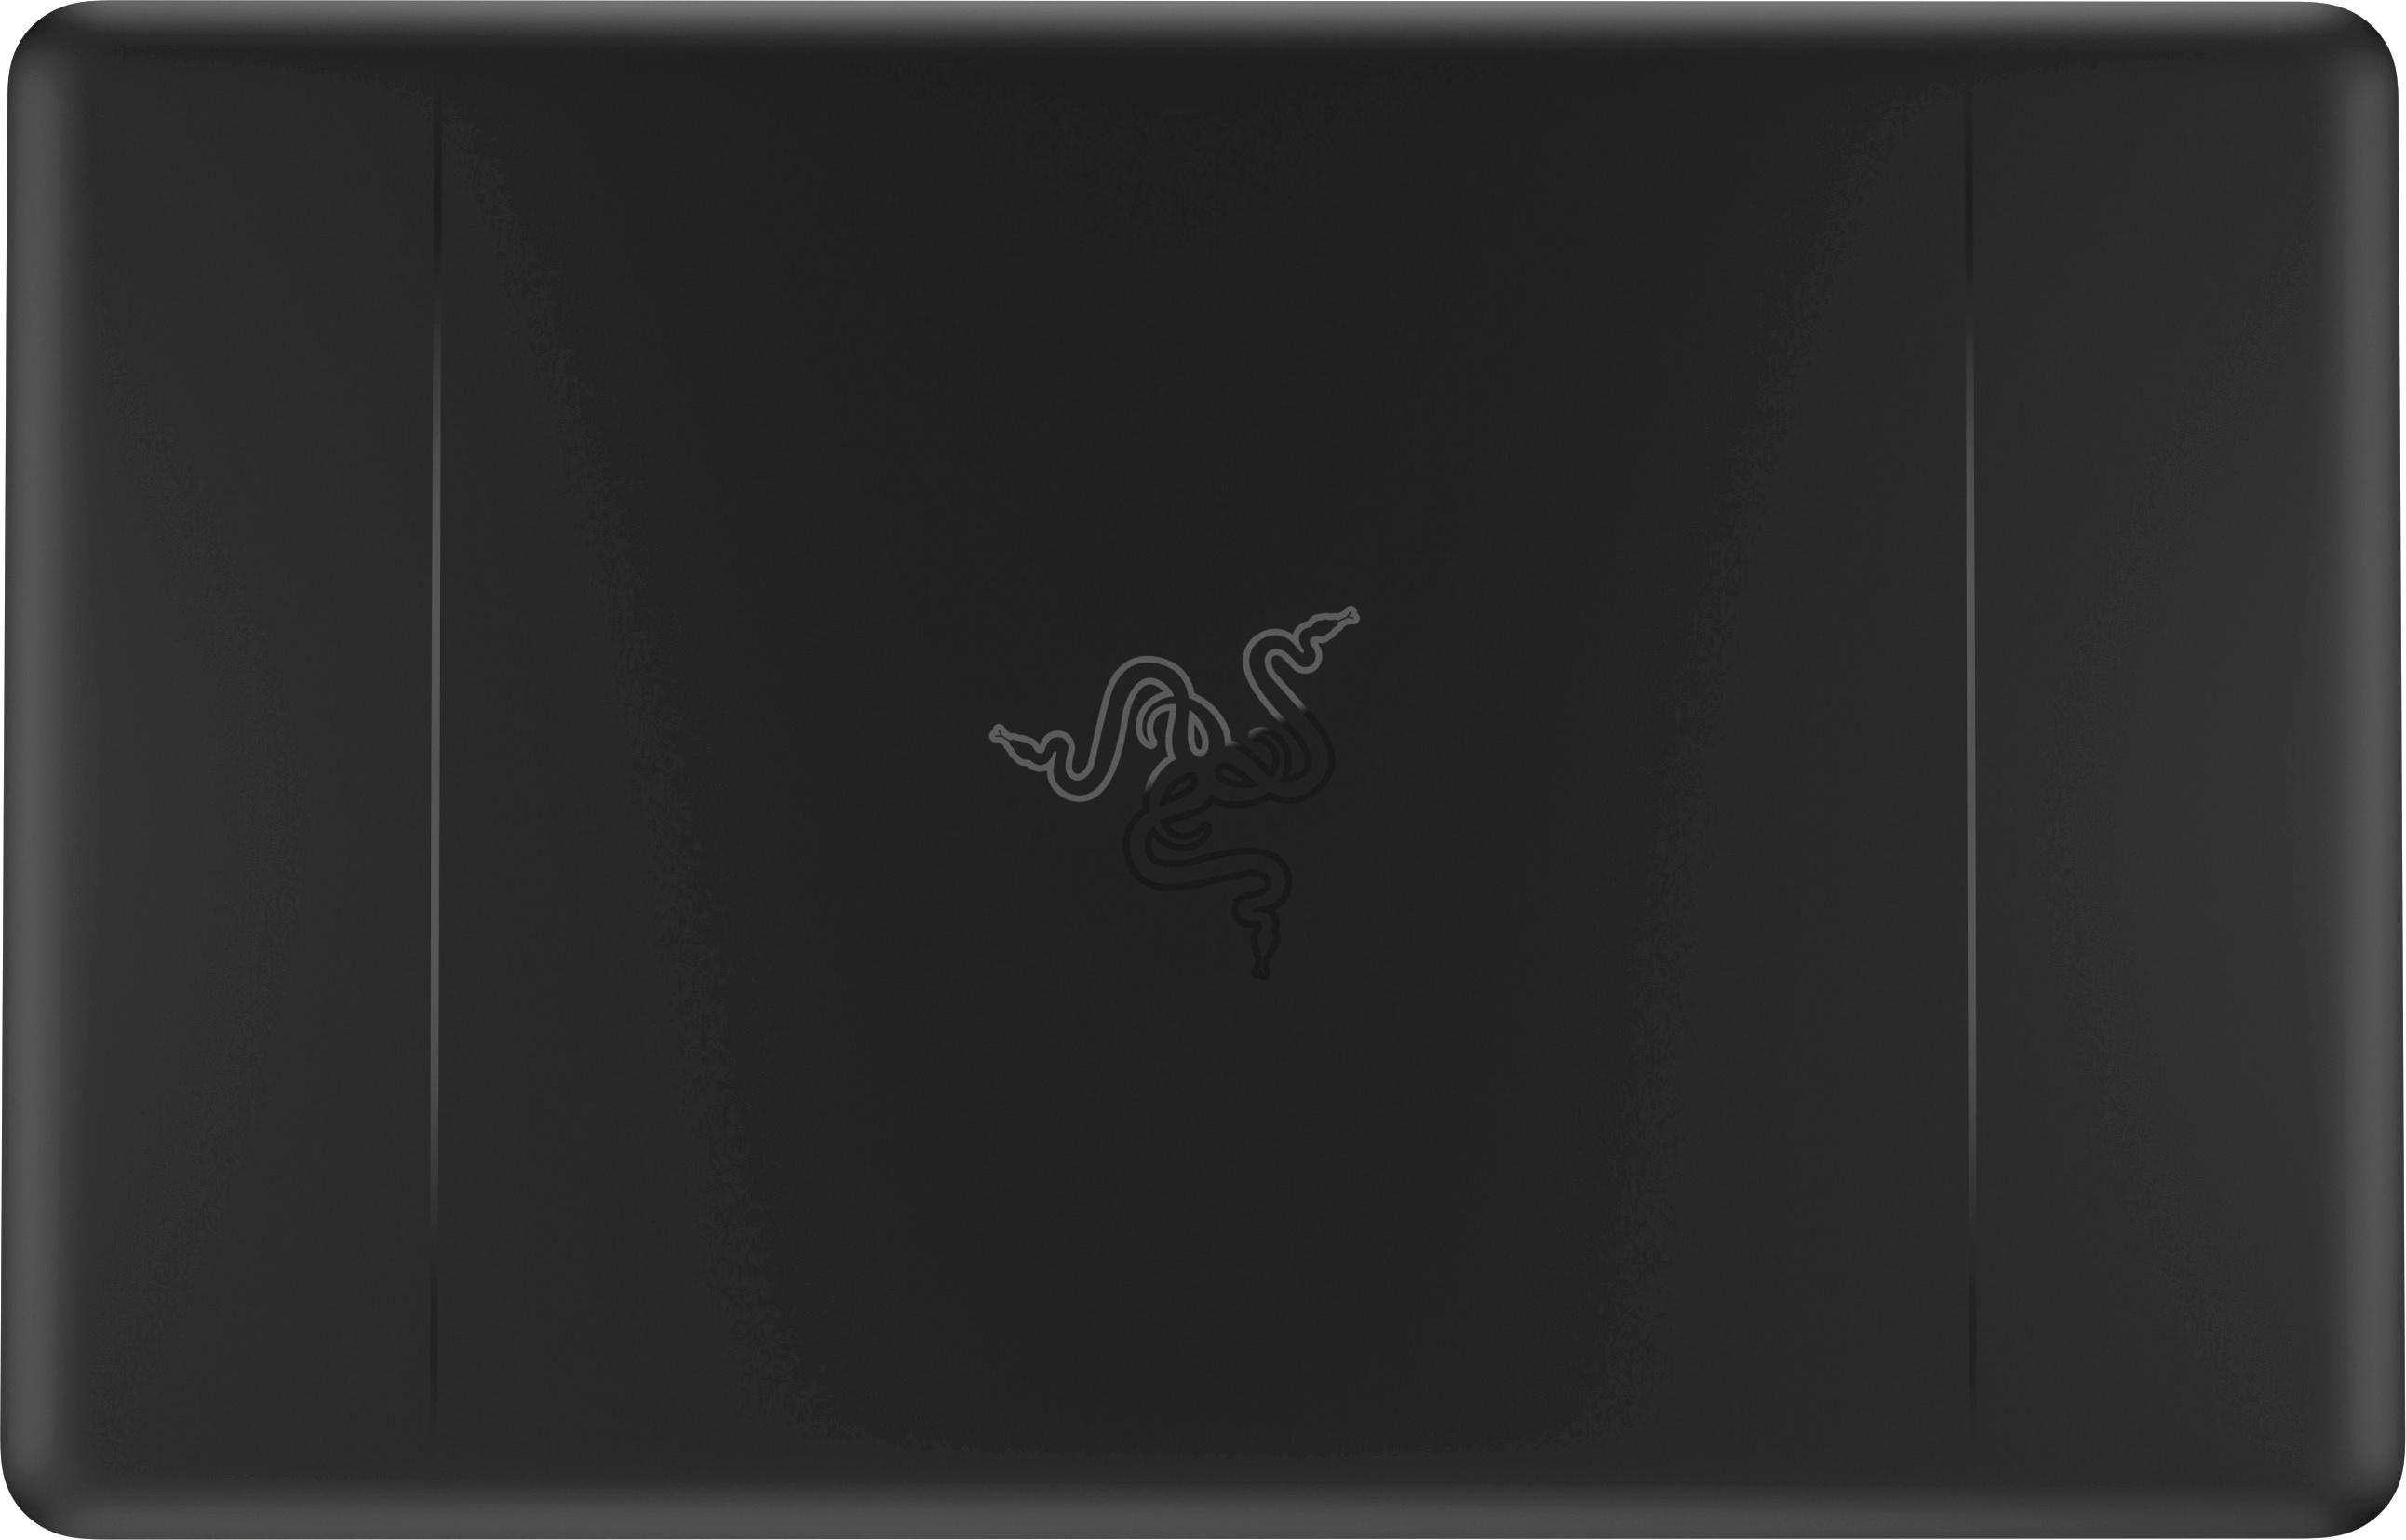 Questions and Answers: Razer Blade Stealth 13.3